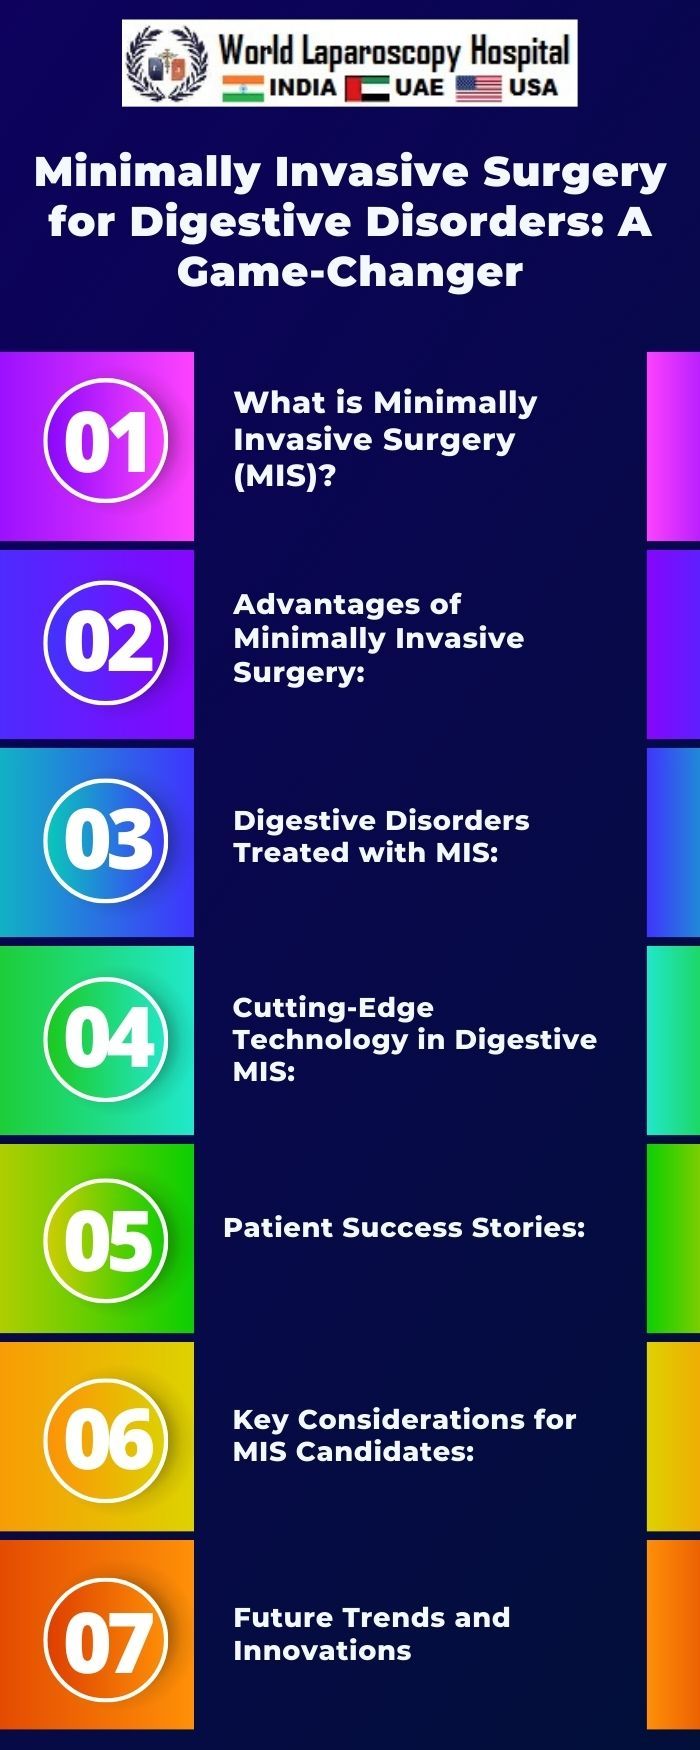 Minimally Invasive Surgery for Digestive Disorders: A Game-Changer